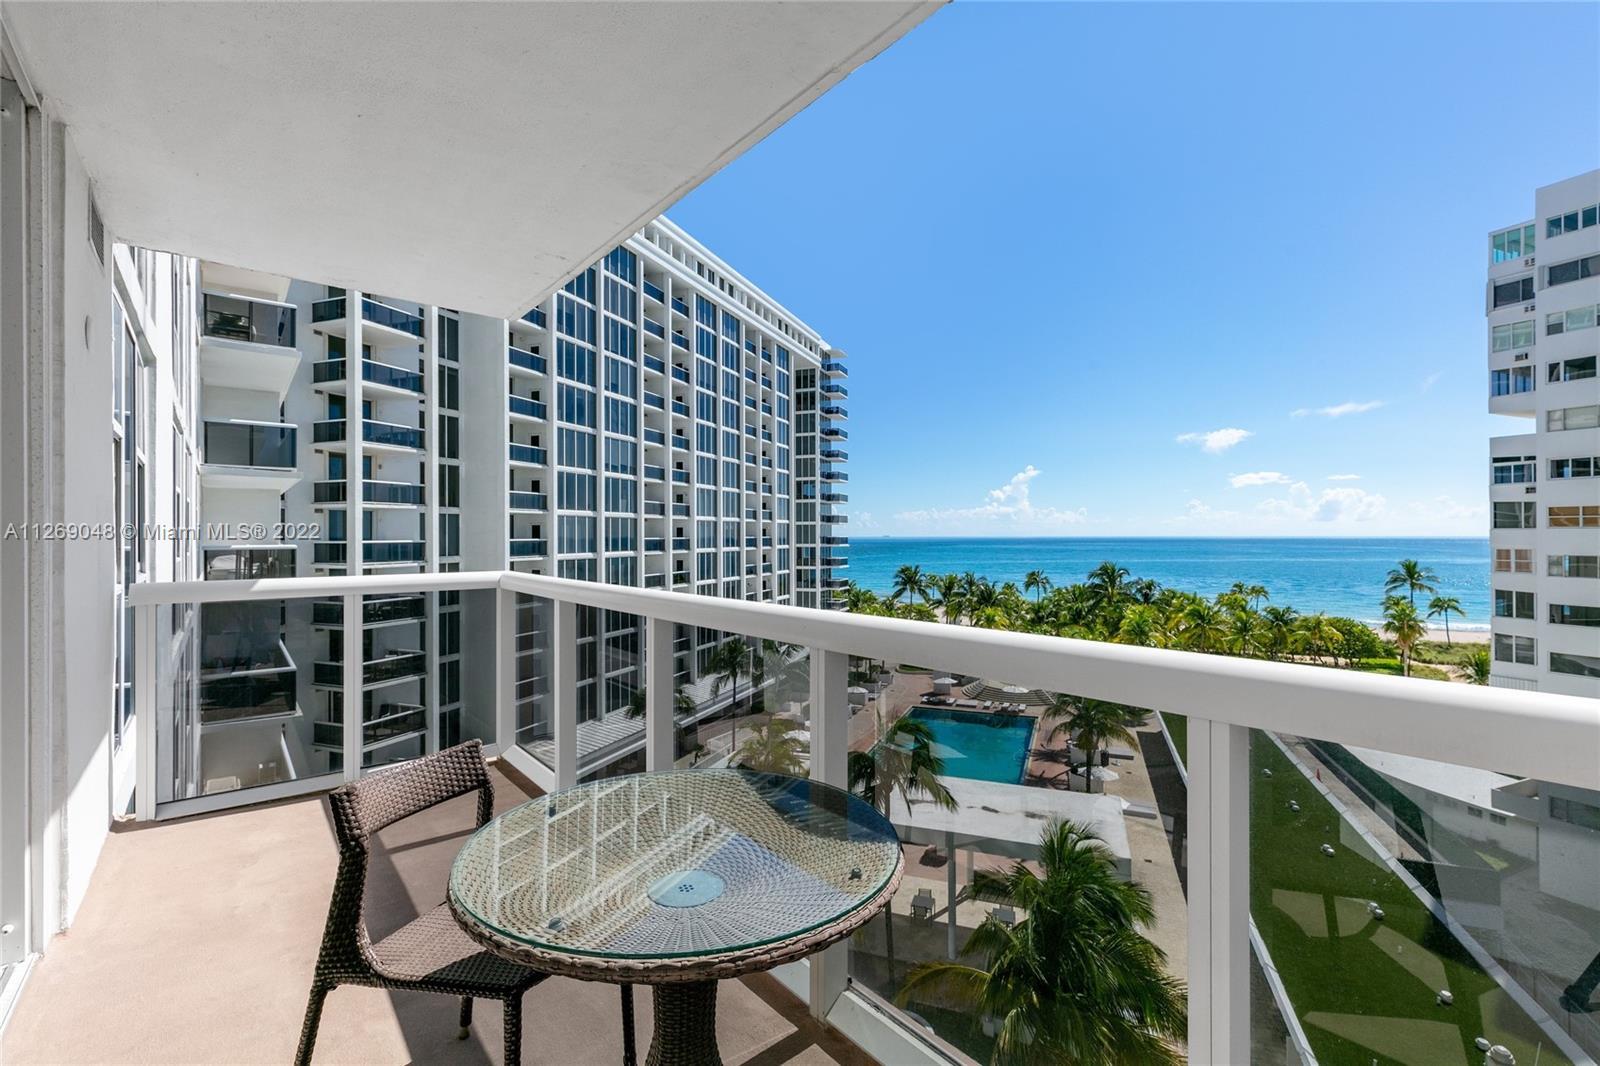 Immerse yourself in the direct deep blue water views & ocean breeze from your completely remodeled b